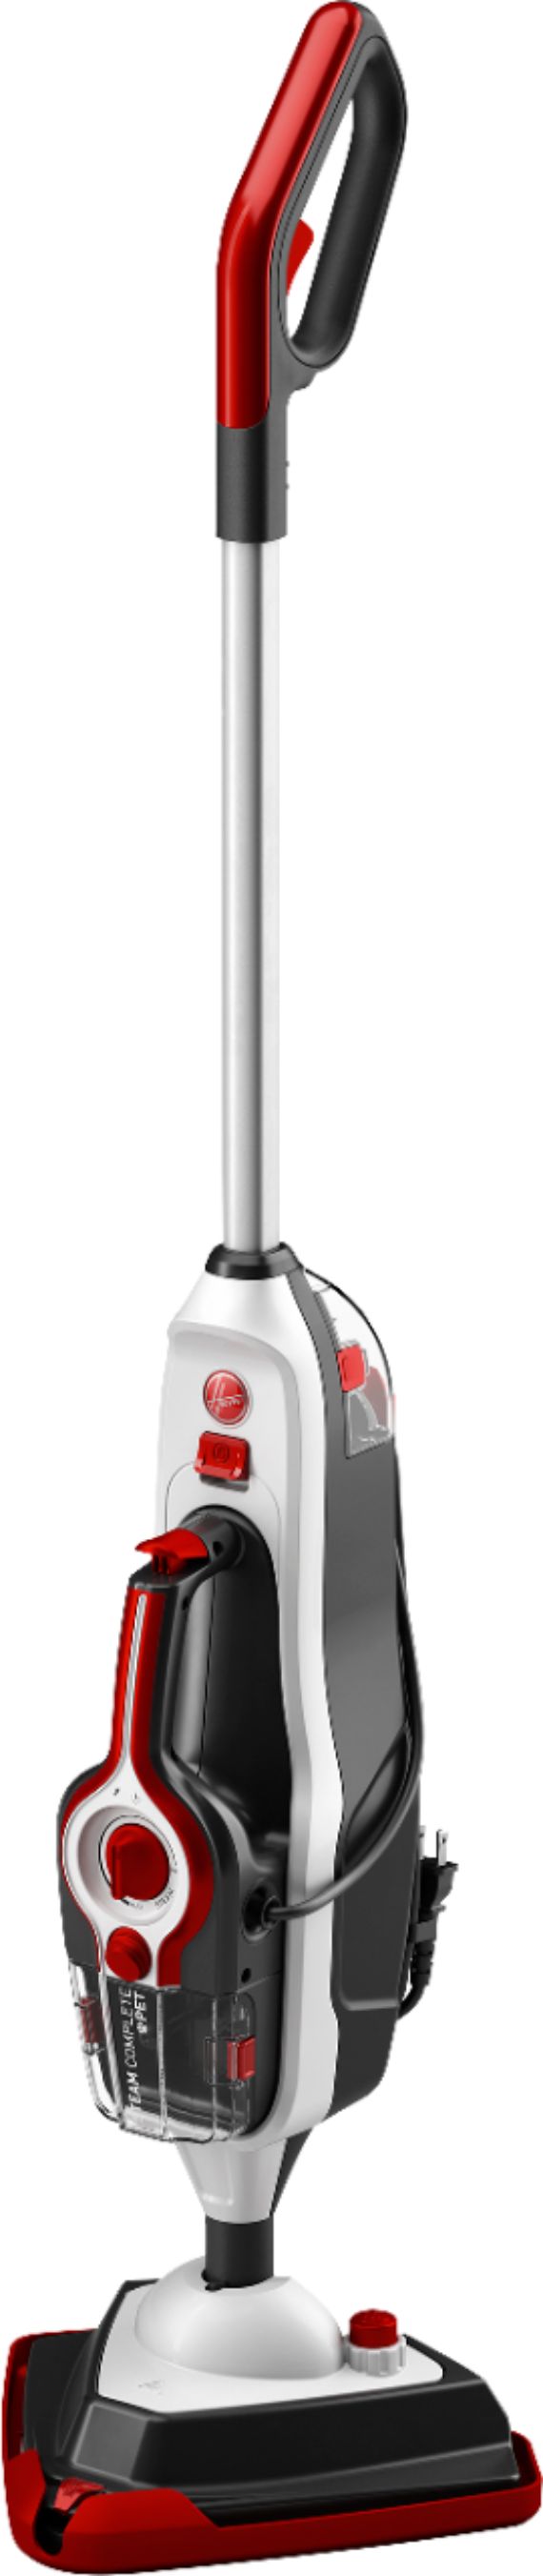 Hoover Complete Pet Steam Mop with Removable Handheld Steamer, Cleaner for  Tile and Hardwood Floors, WH21000, White